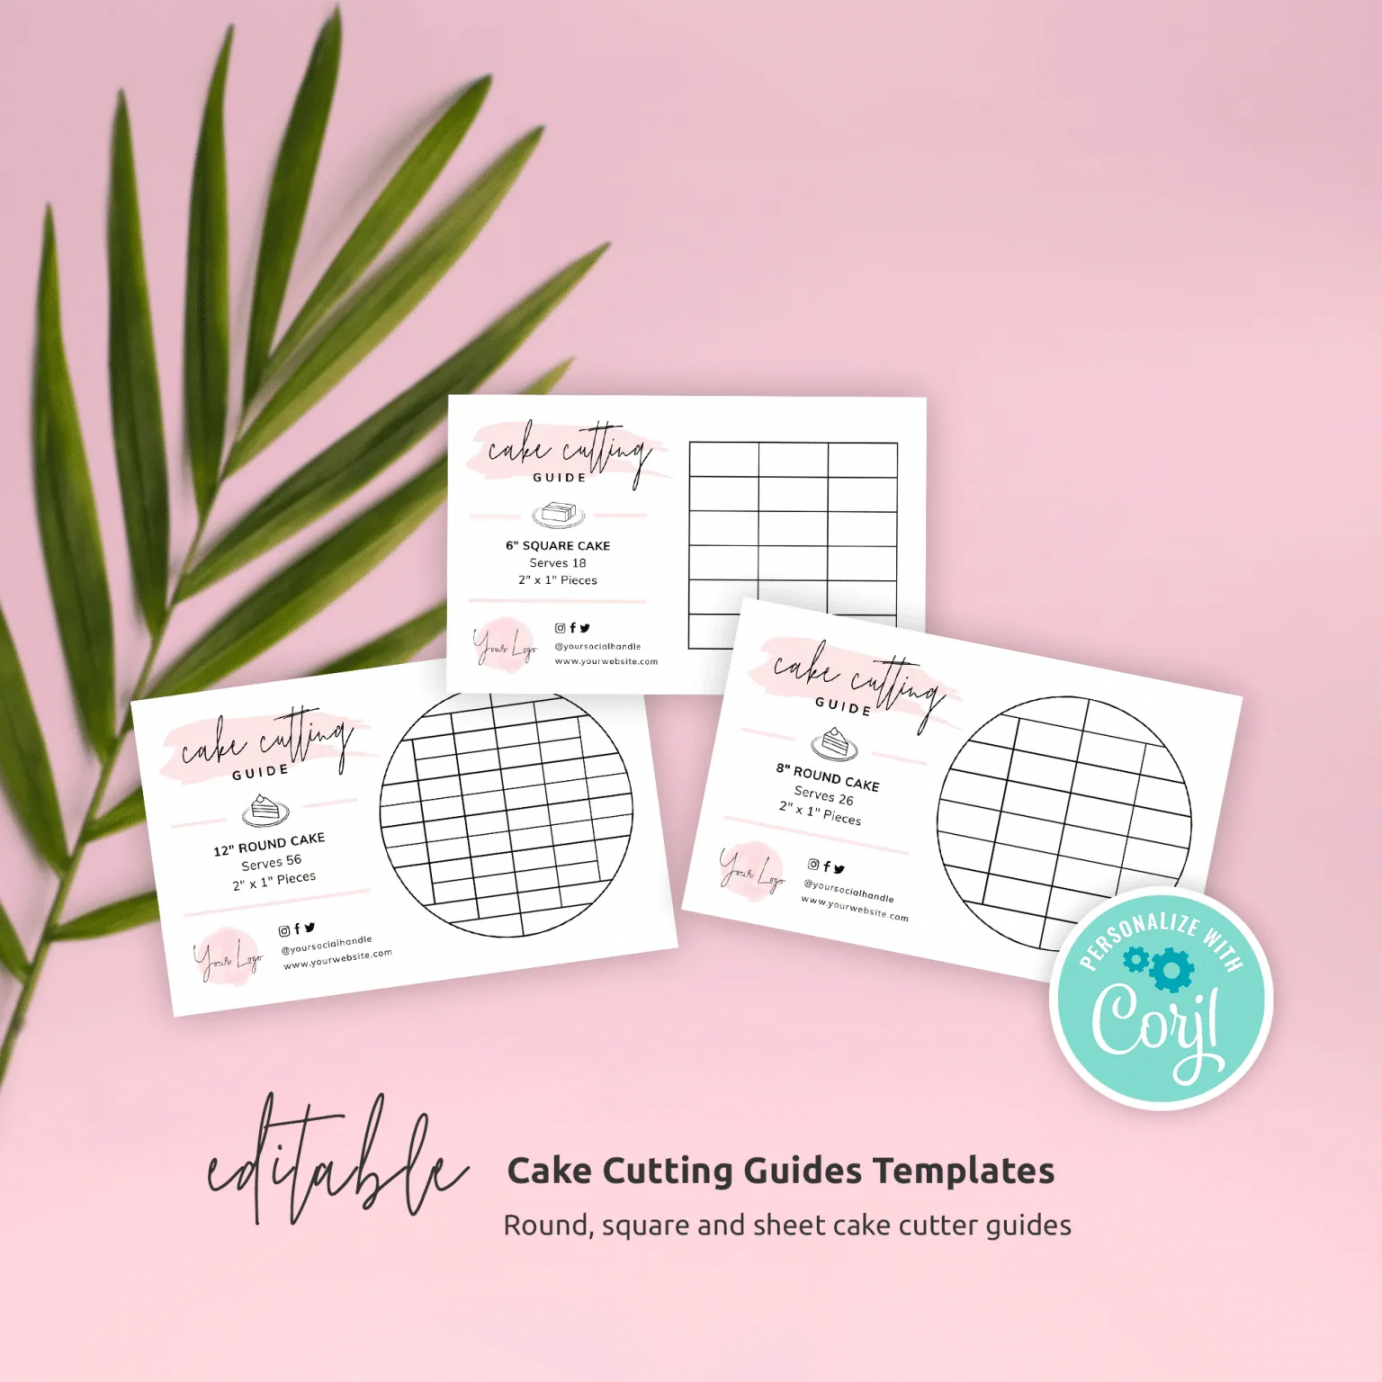 sample cake care cards templates  editable cake care guides  printable banner and brochure design price quote template excel